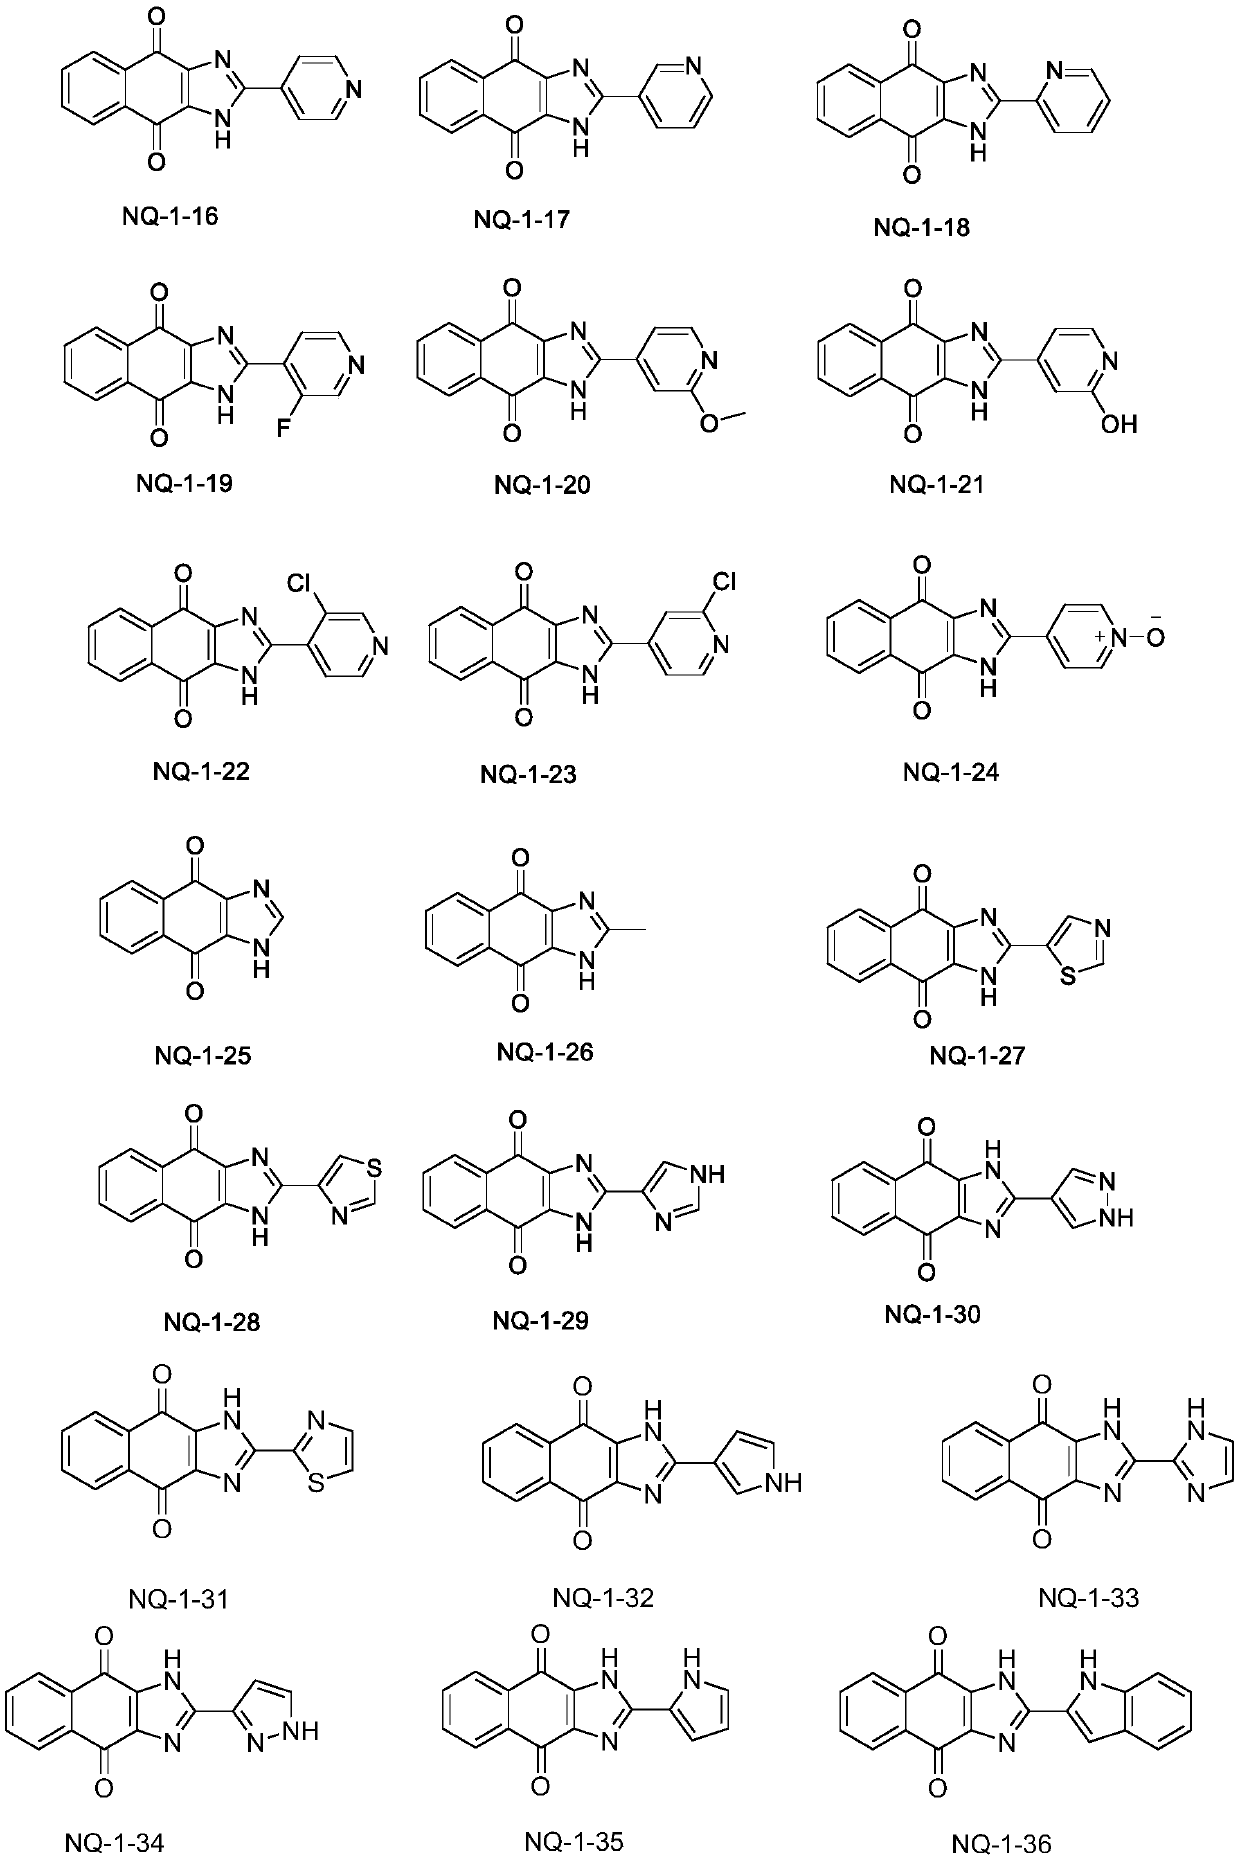 Use of naphthoquinone derivative as inhibitor for IDO1 and/or TDO